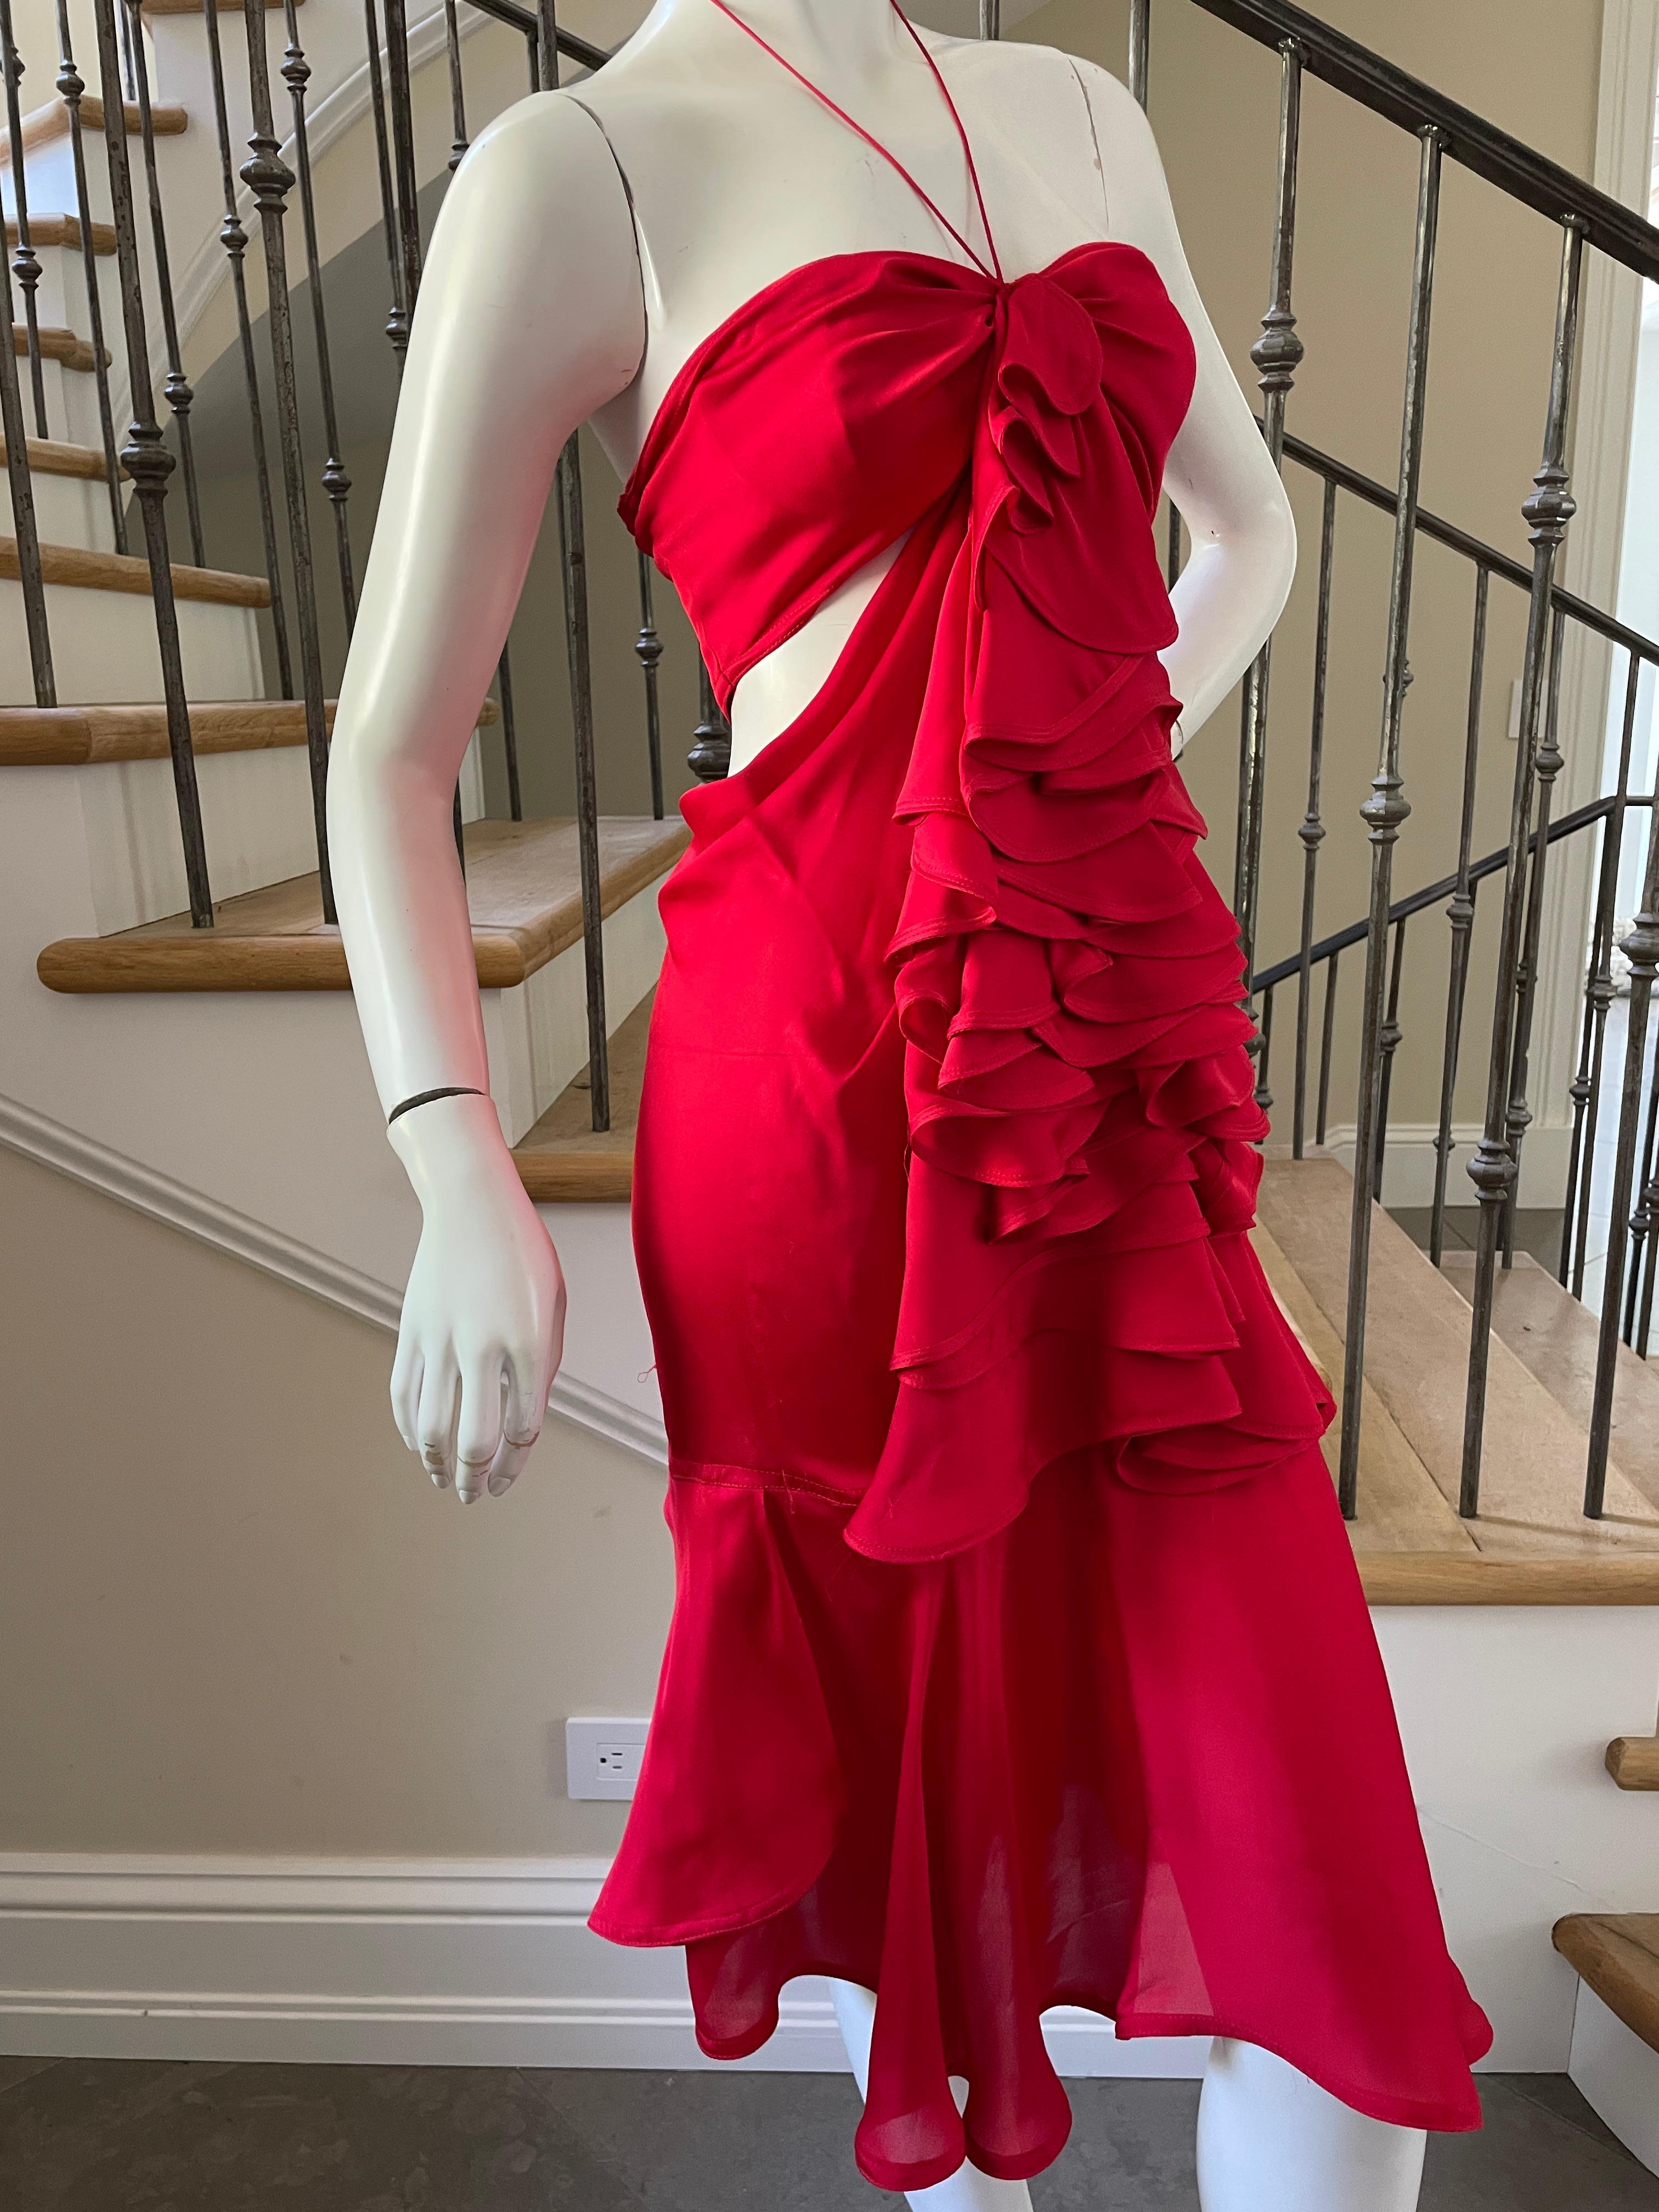 Yves Saint Laurent by Tom Ford 2003 Ruffled Red Silk Dress  In Excellent Condition For Sale In Cloverdale, CA